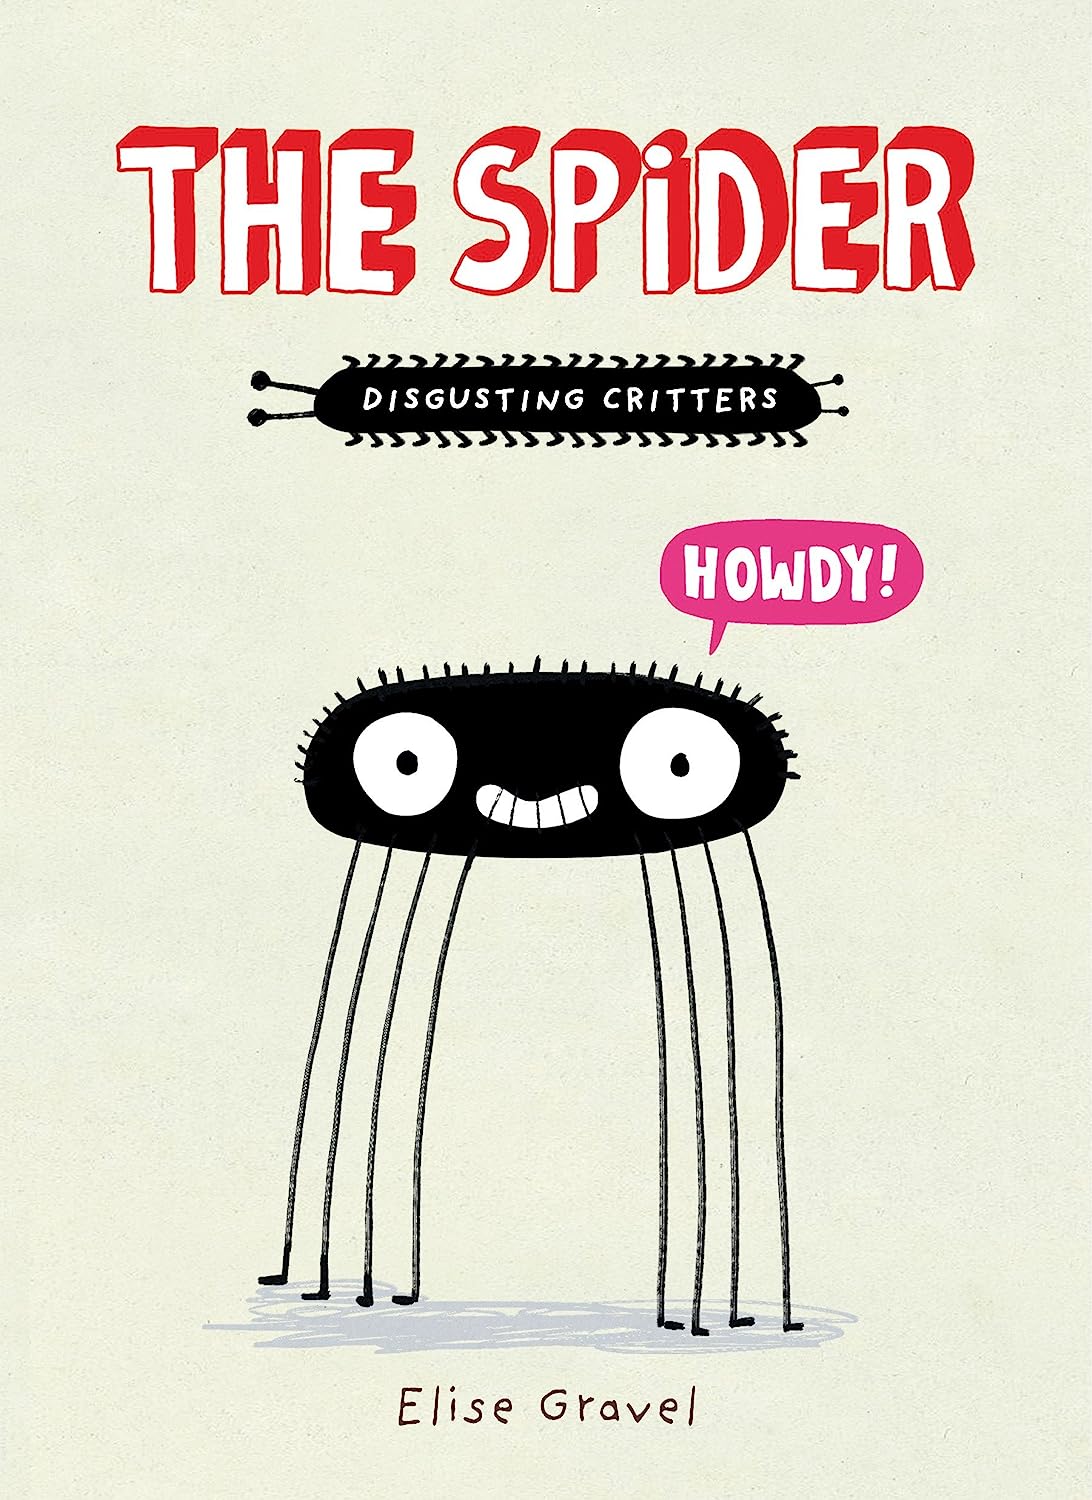 Image of book cover Disgusting Critters: the Spider.